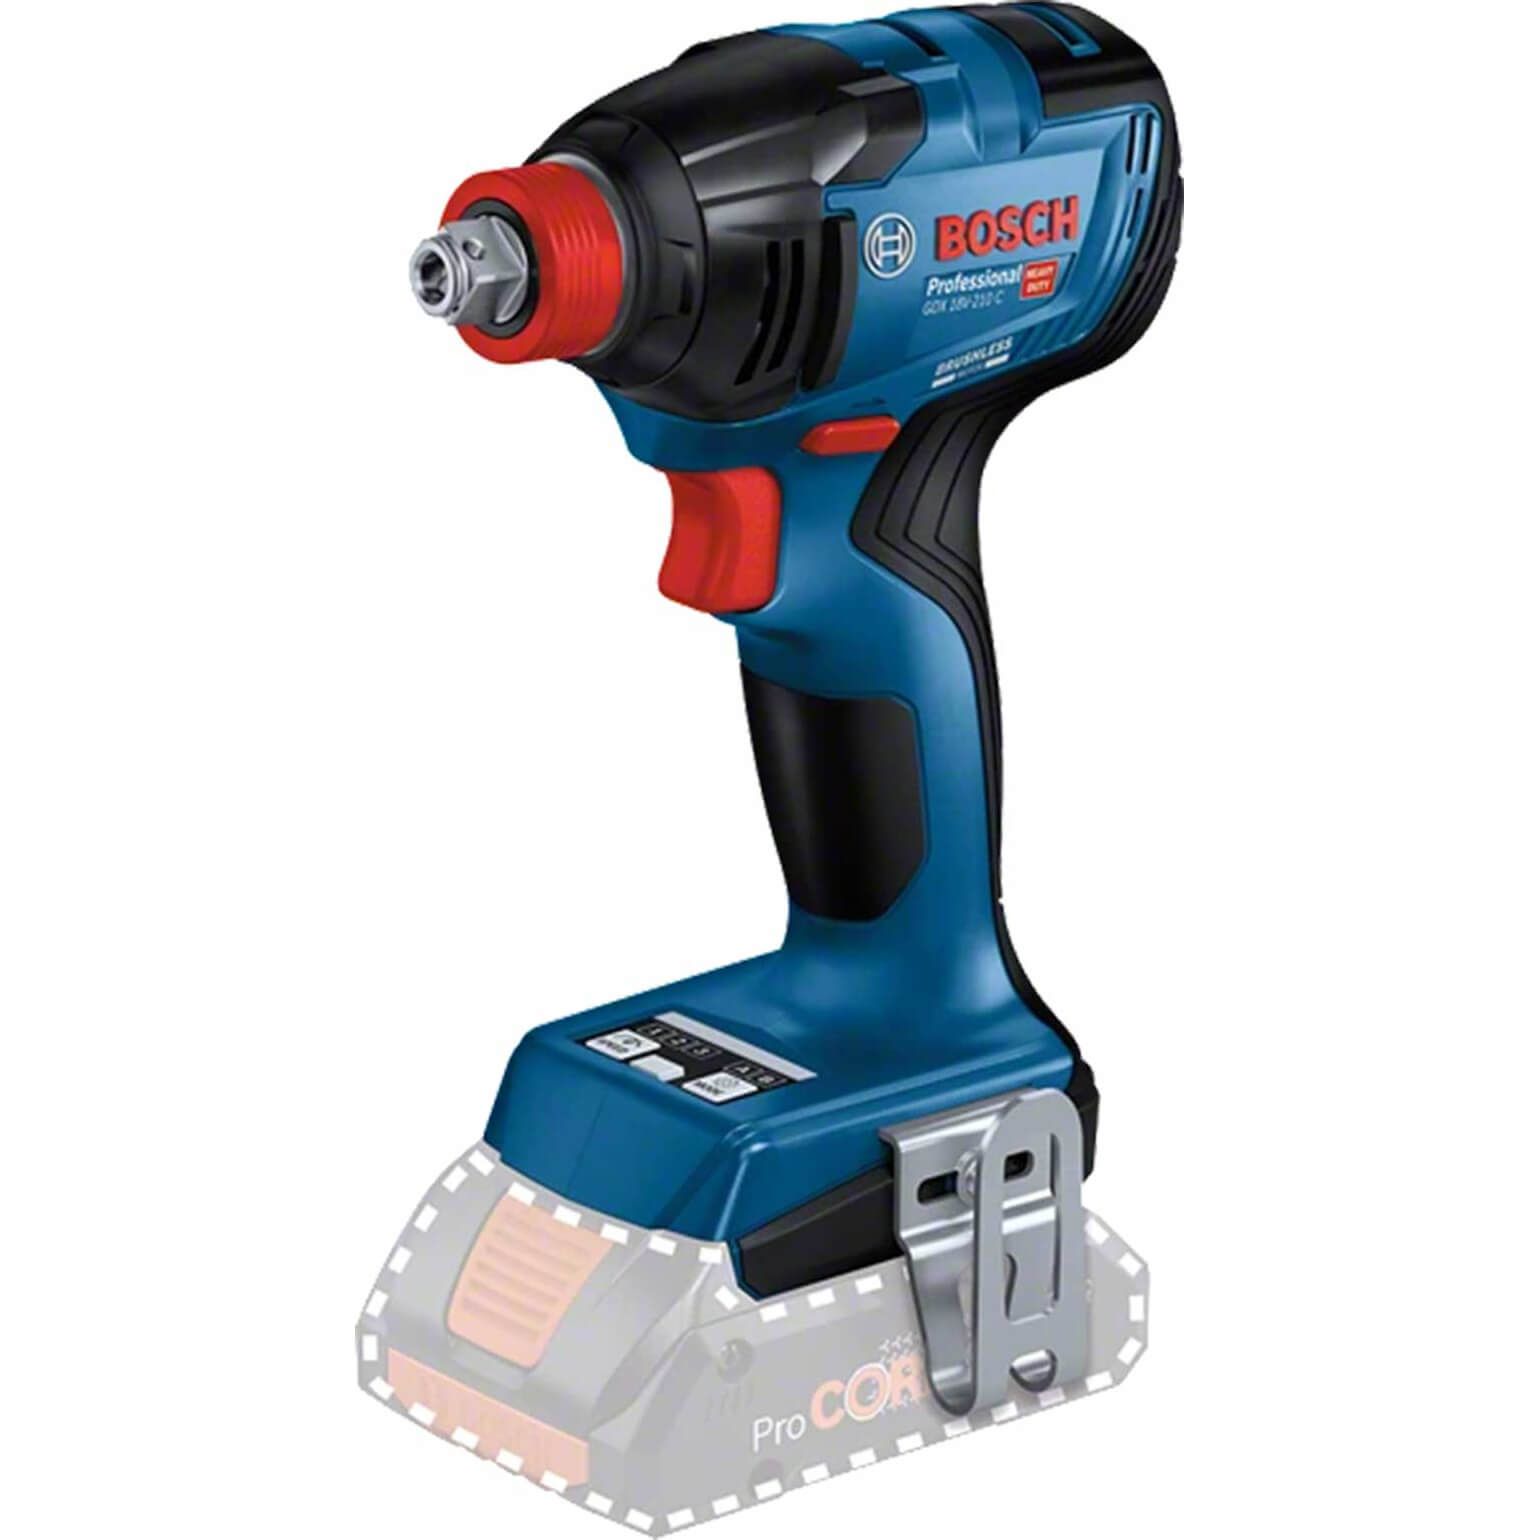 Bosch GDX 18V-210 C 18v Cordless Impact Wrench / Driver No Batteries No Charger No Case